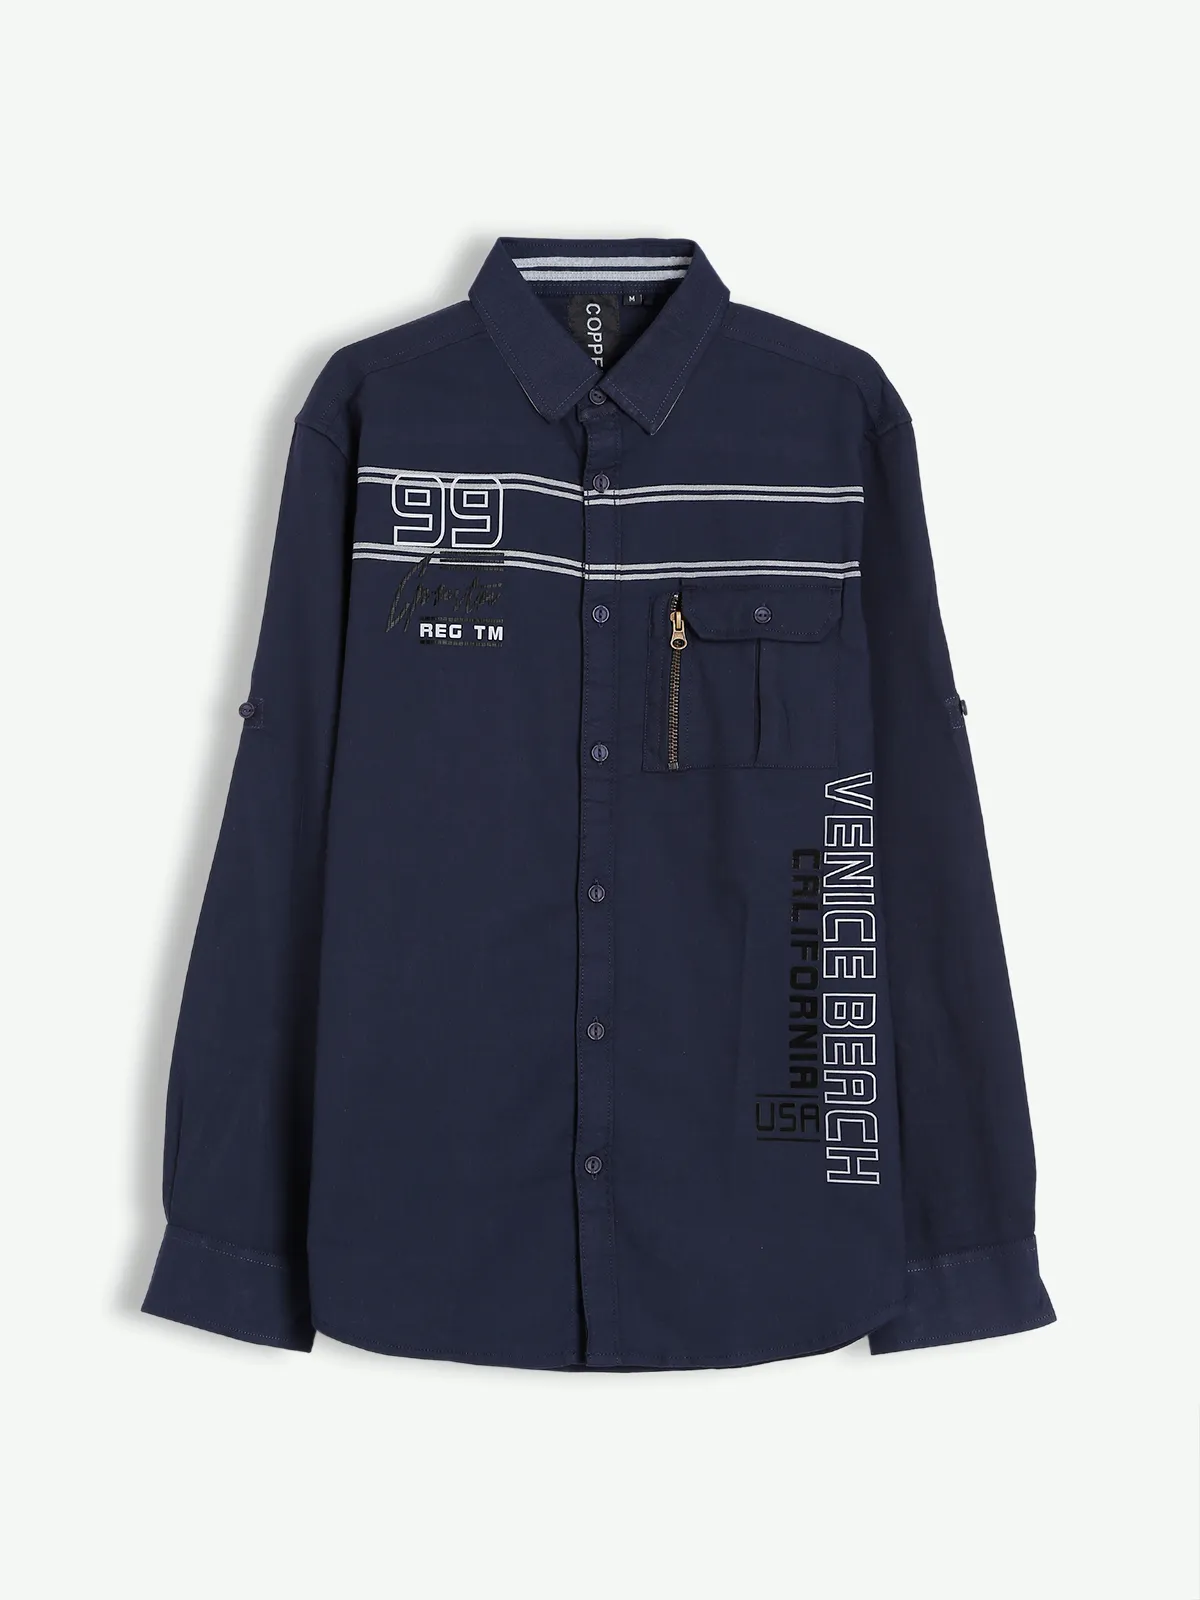 Copperstone navy printed casual shirt